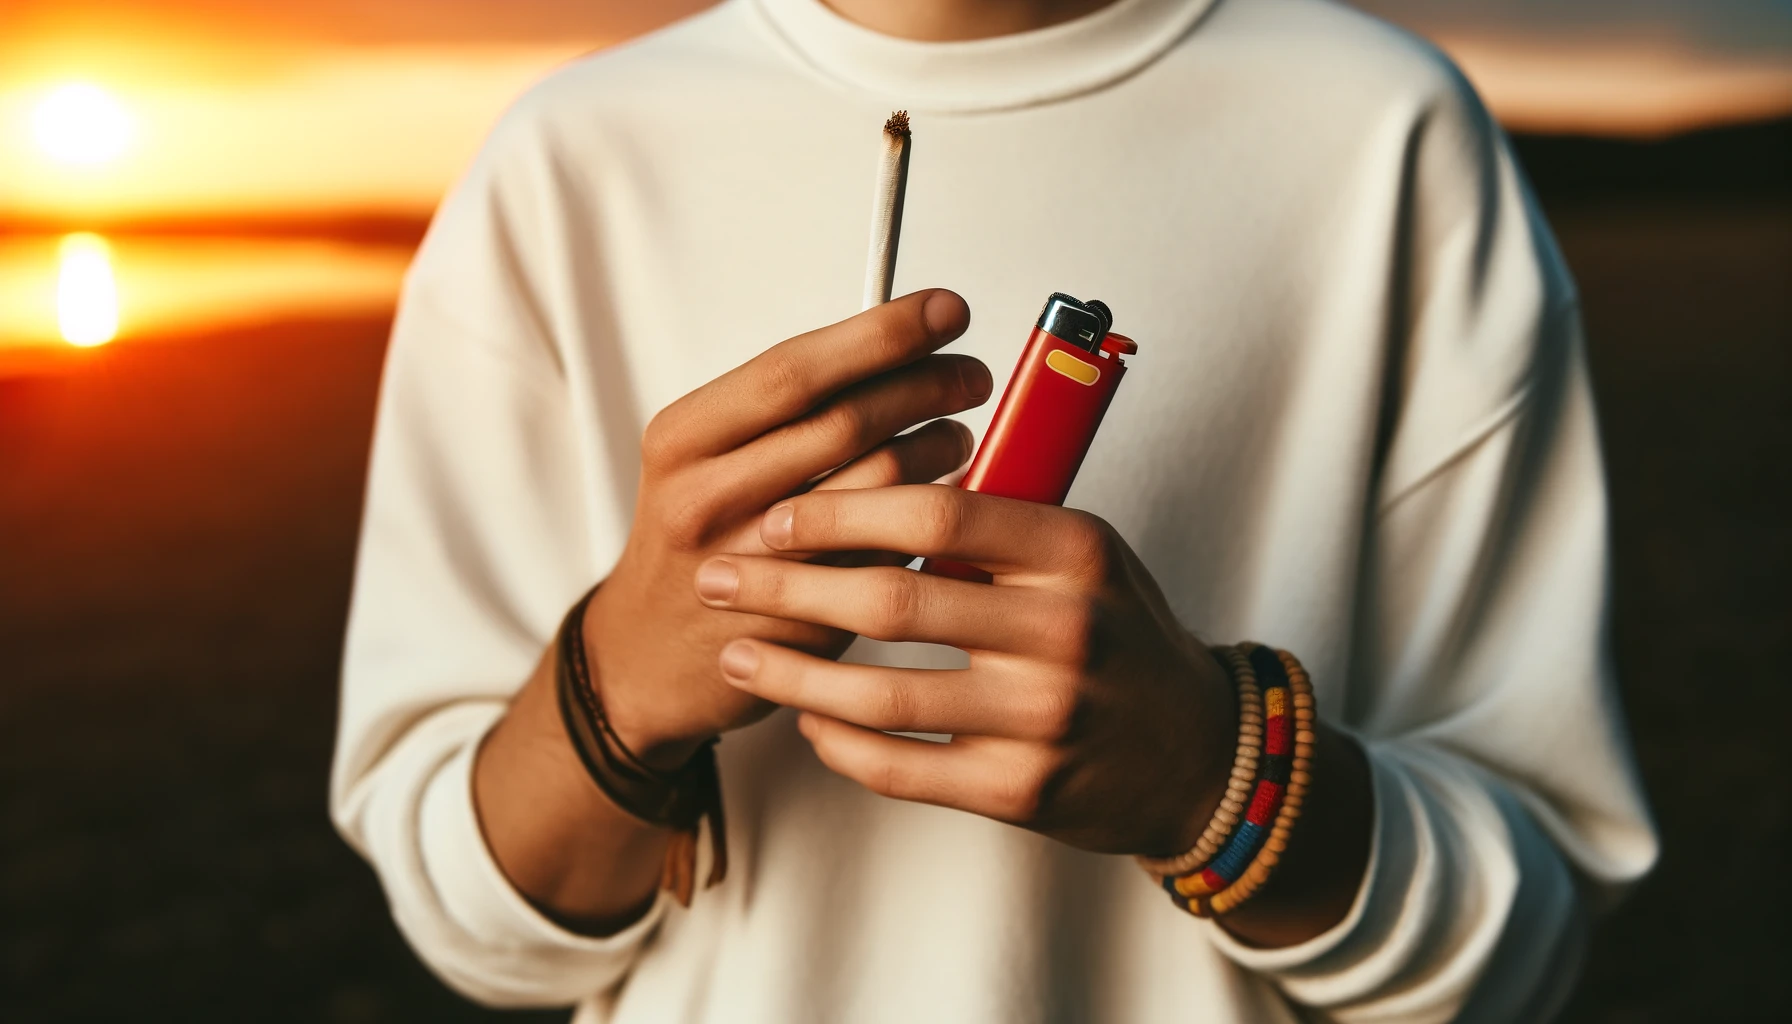 DALL·E 2024-04-25 11.19.13 - A close-up photo of a person's hands holding a rolled unlit cigarette and a classic red and yellow lighter. The person is wearing a white long-sleeve